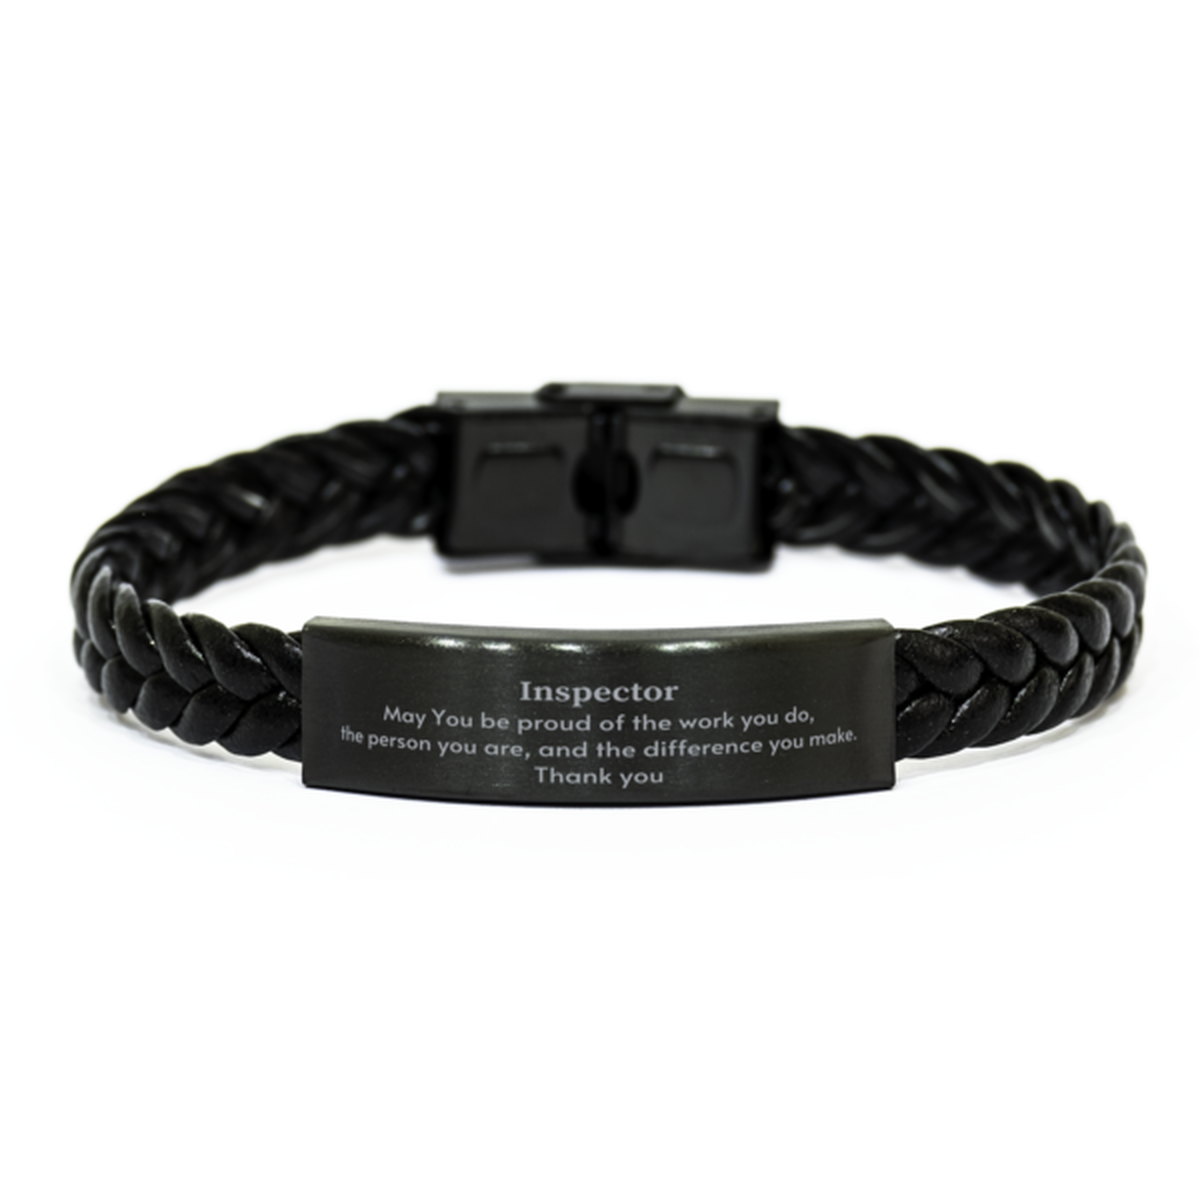 Heartwarming Braided Leather Bracelet Retirement Coworkers Gifts for Inspector, Inspector May You be proud of the work you do, the person you are Gifts for Boss Men Women Friends